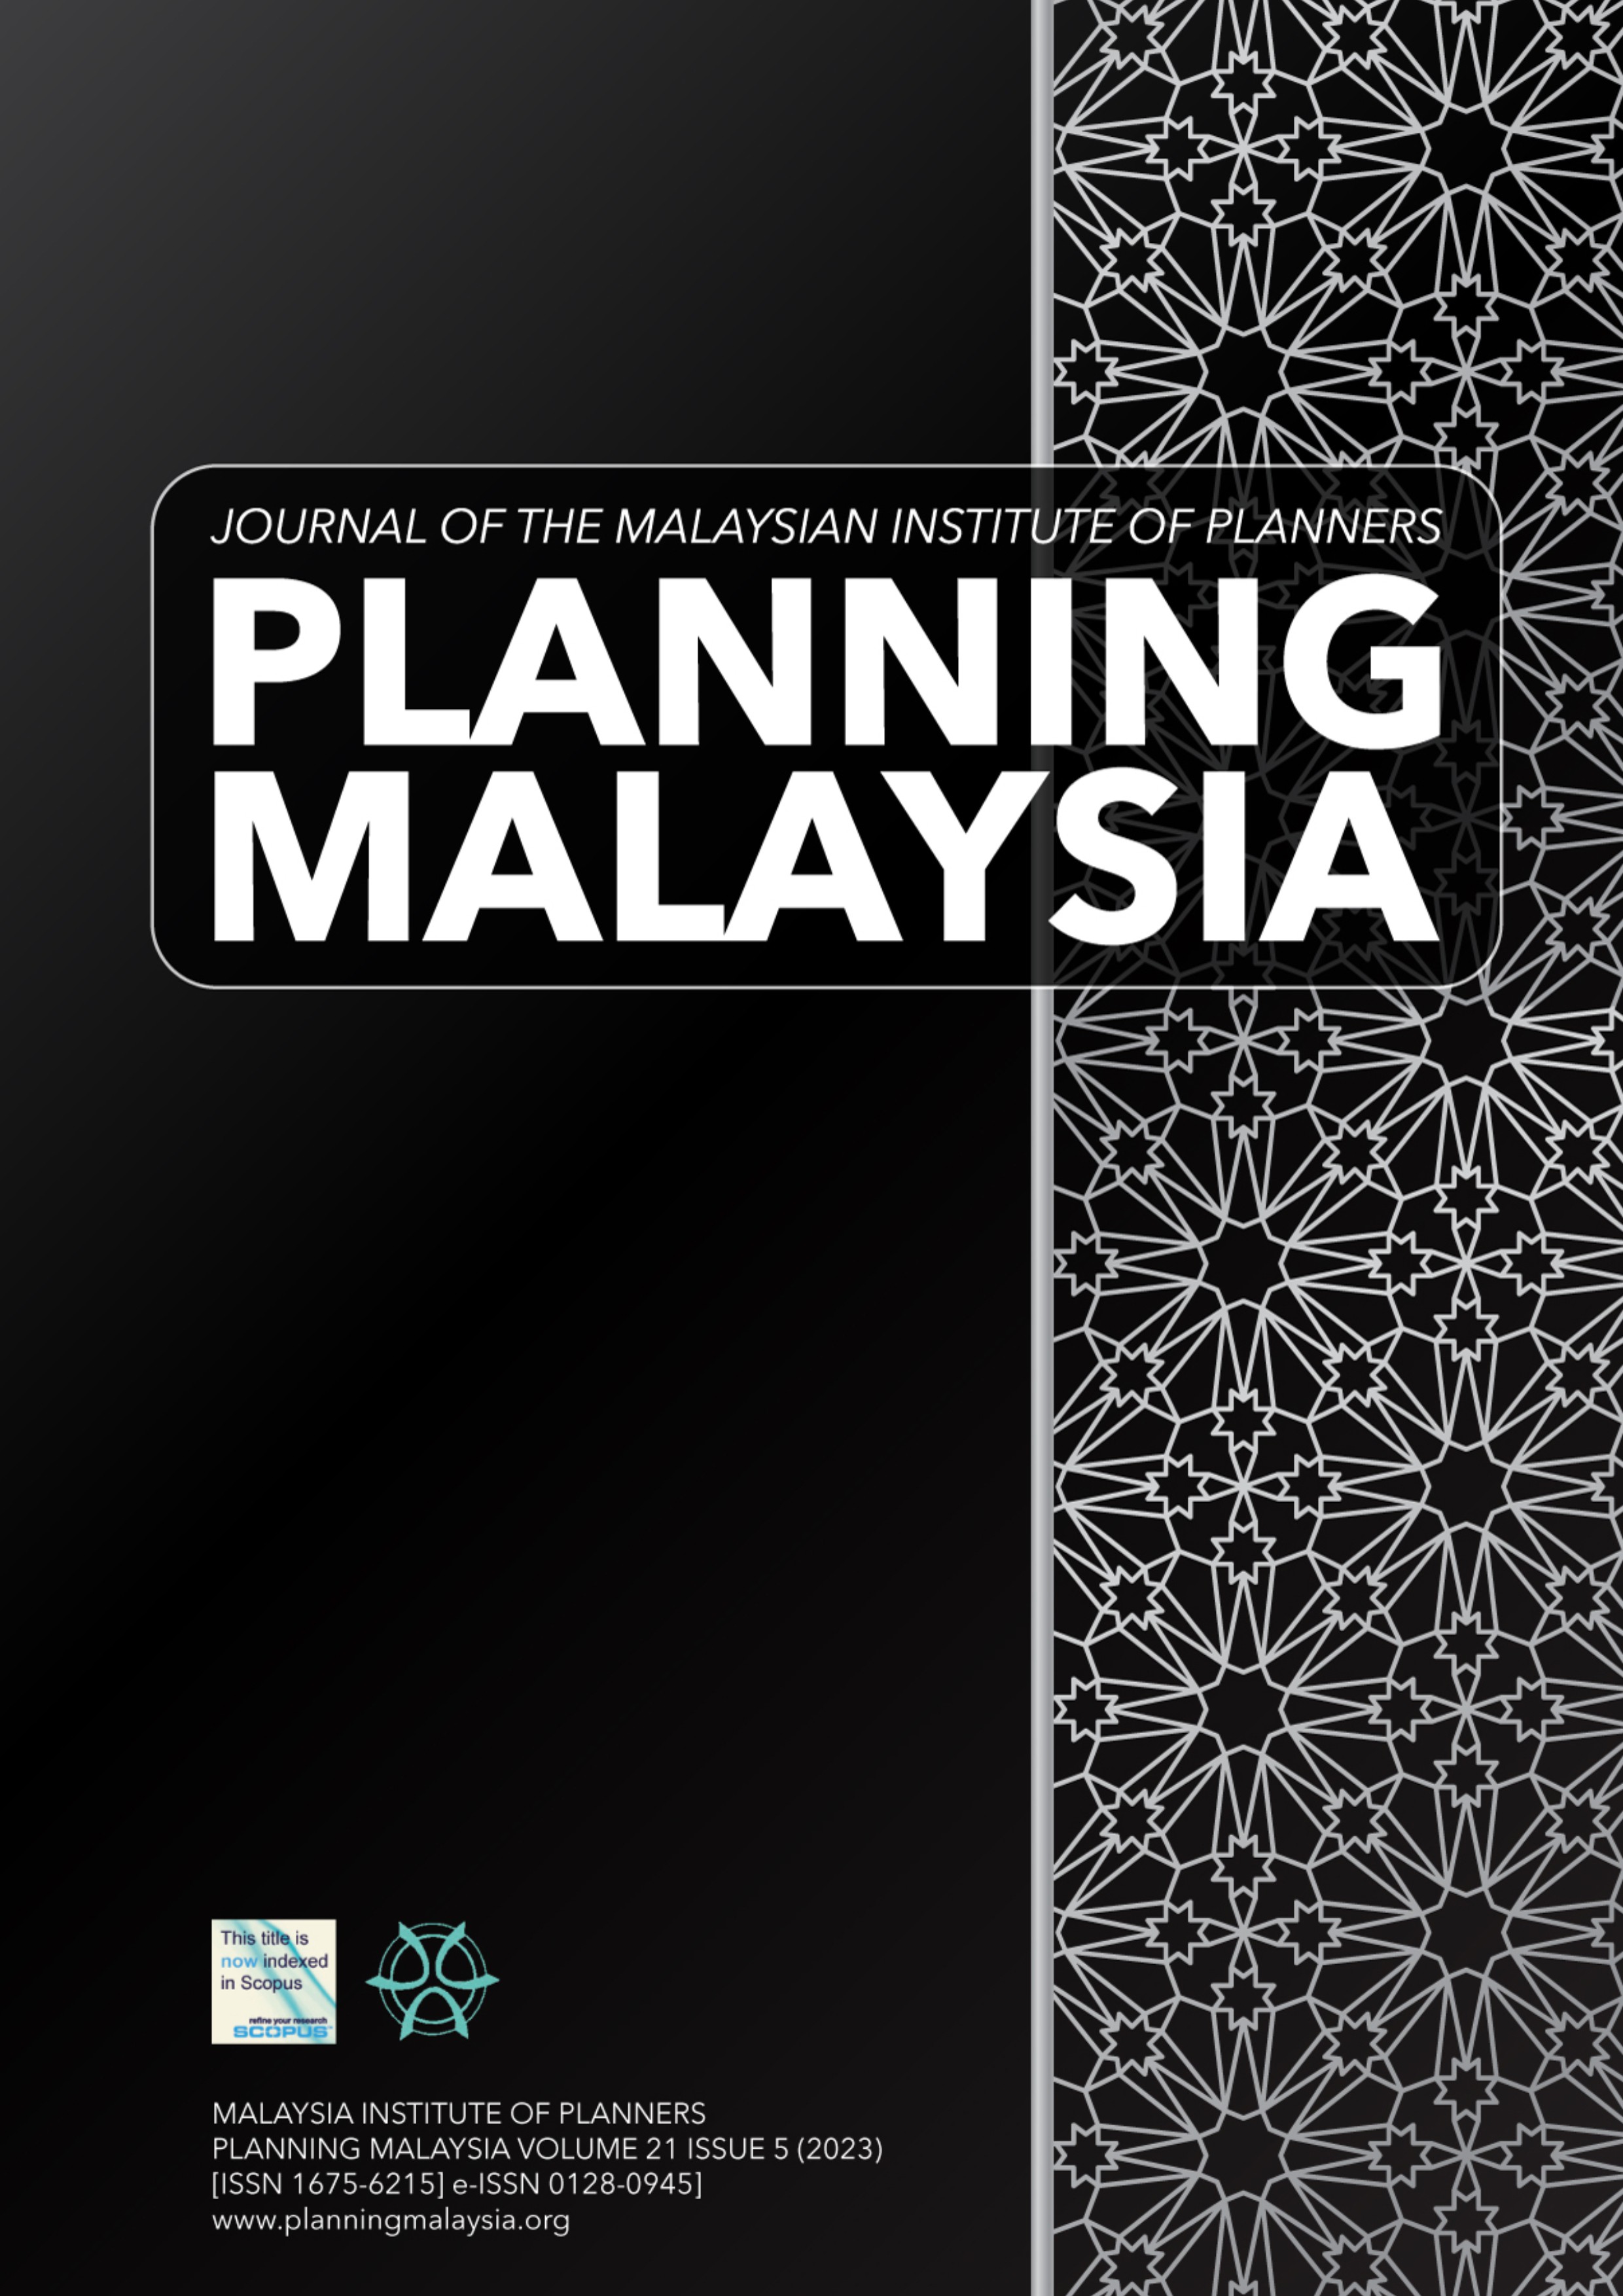 					View Vol. 21 (2023): PLANNING MALAYSIA JOURNAL : Volume 21, Issue 5, 2023
				